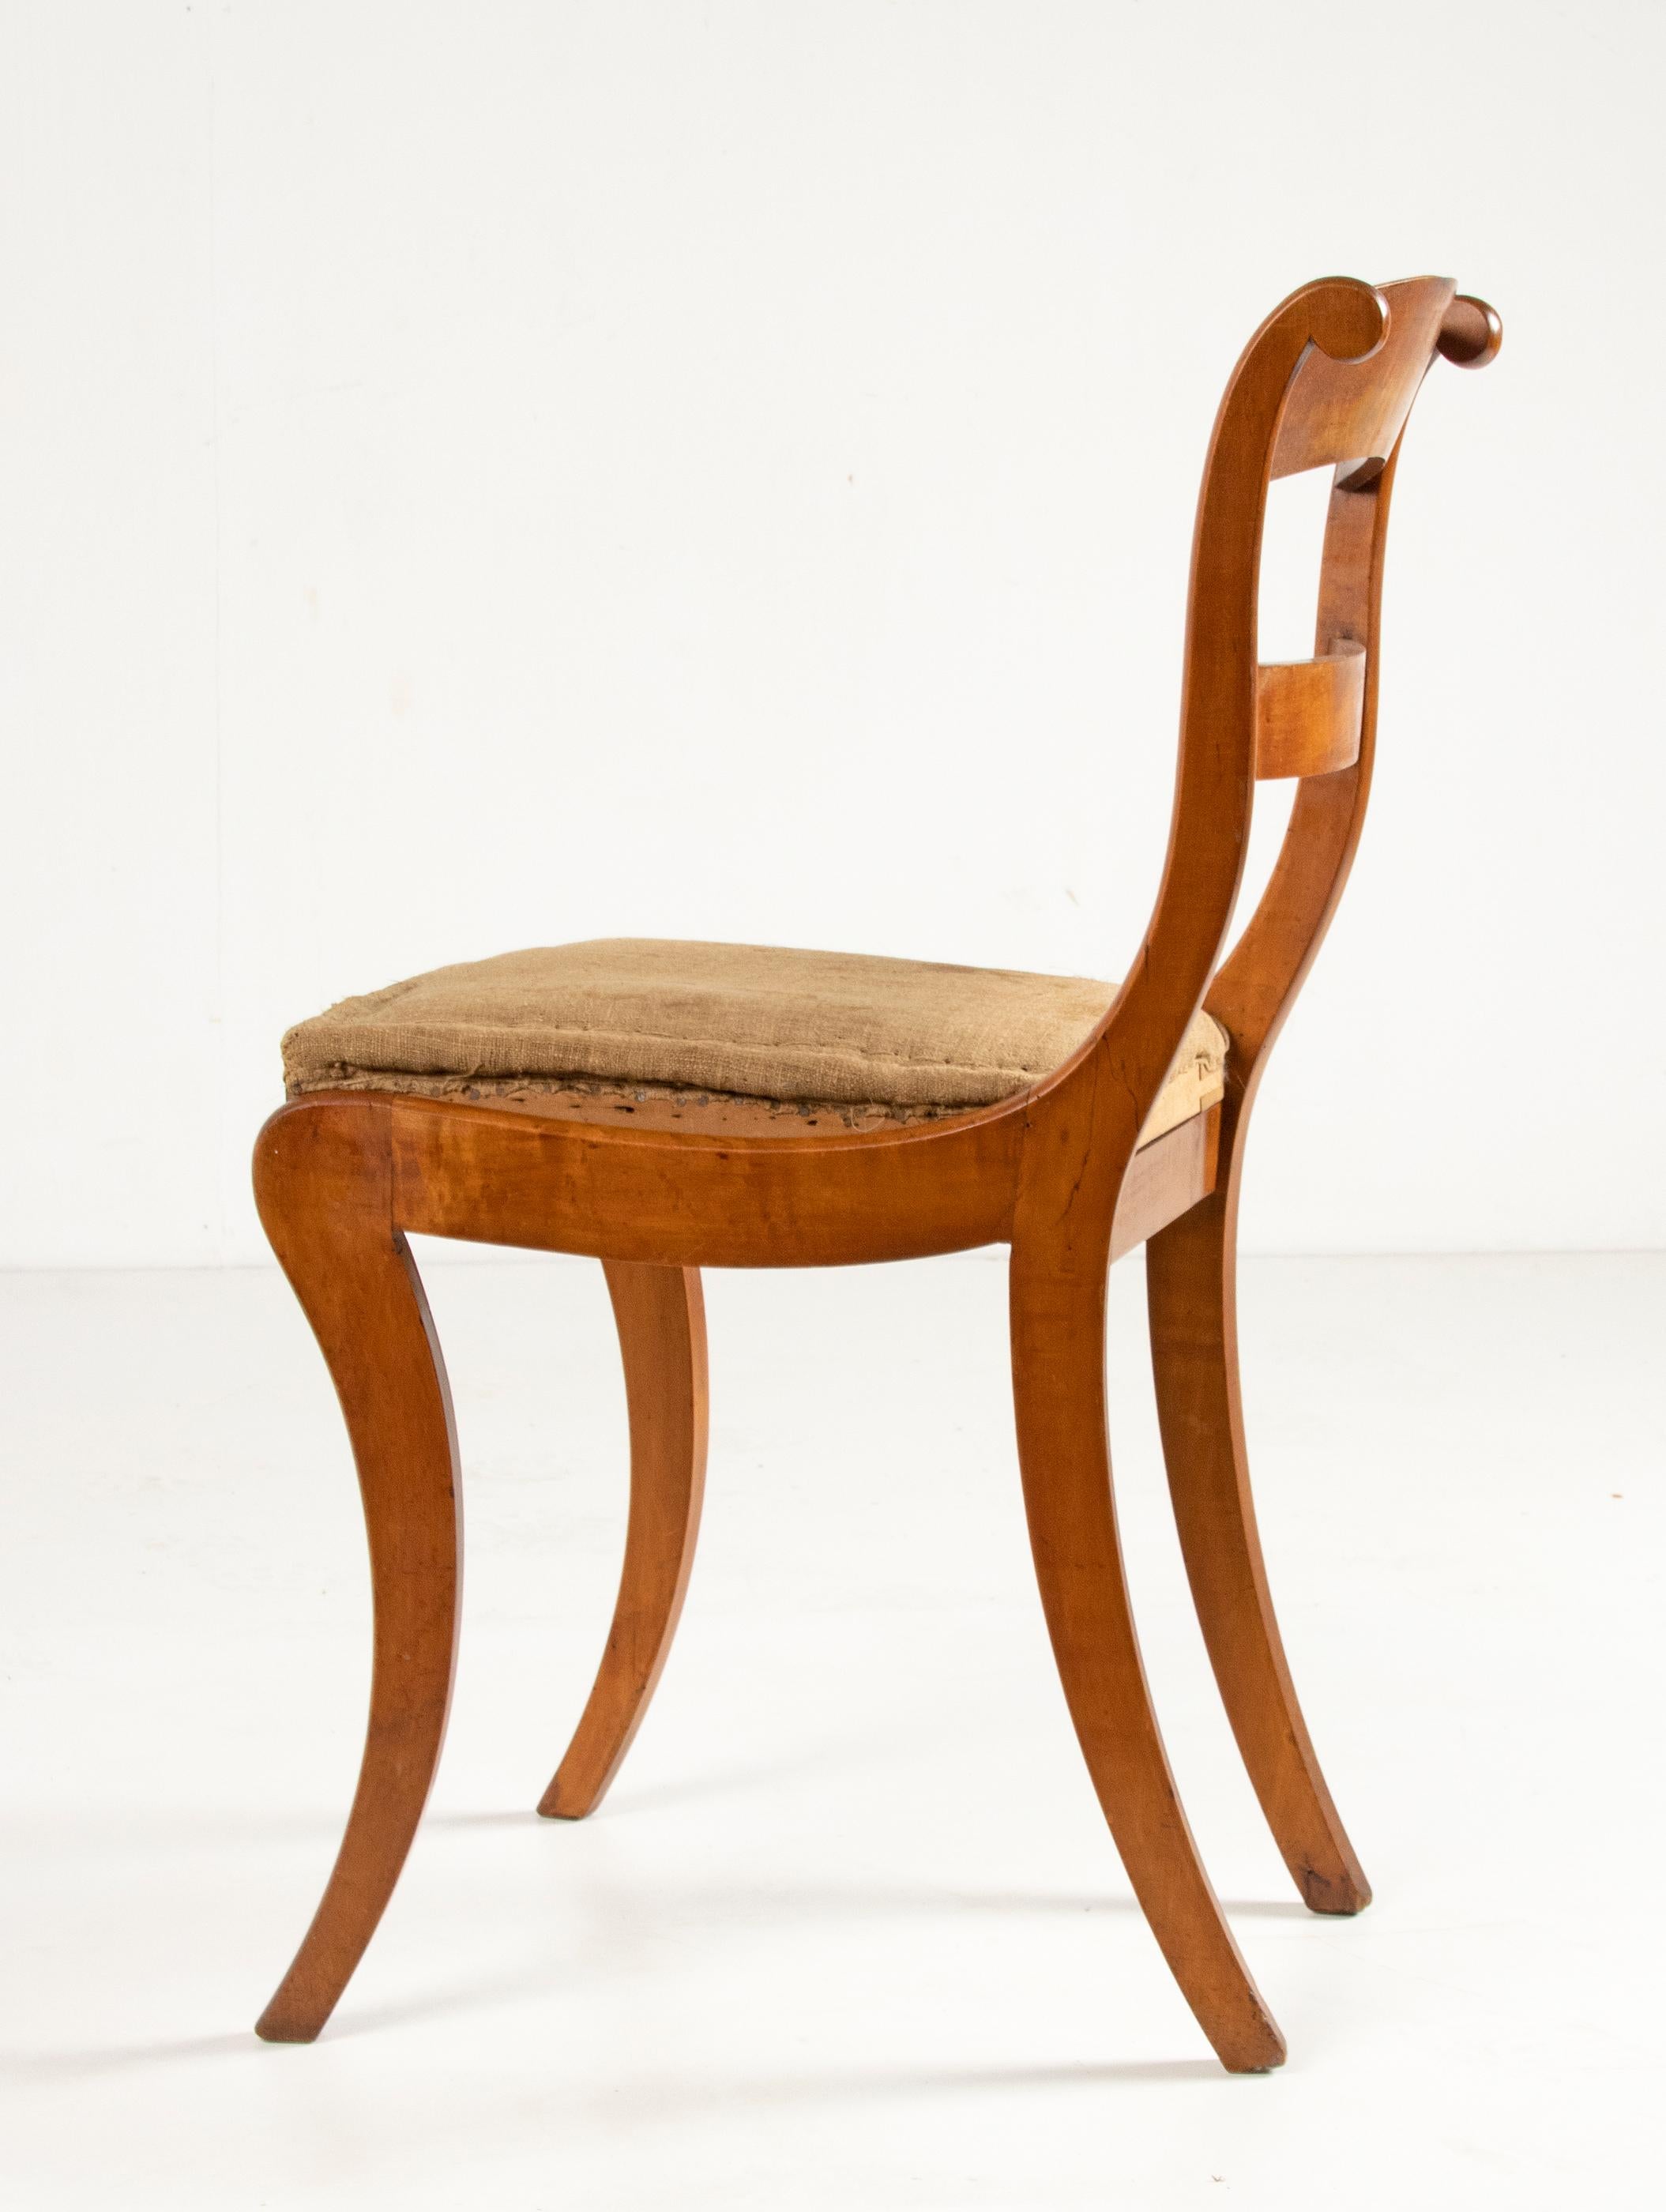 Early 19th Century Charles X Birds-Eye Maple Wood Dining Chairs For Sale 1